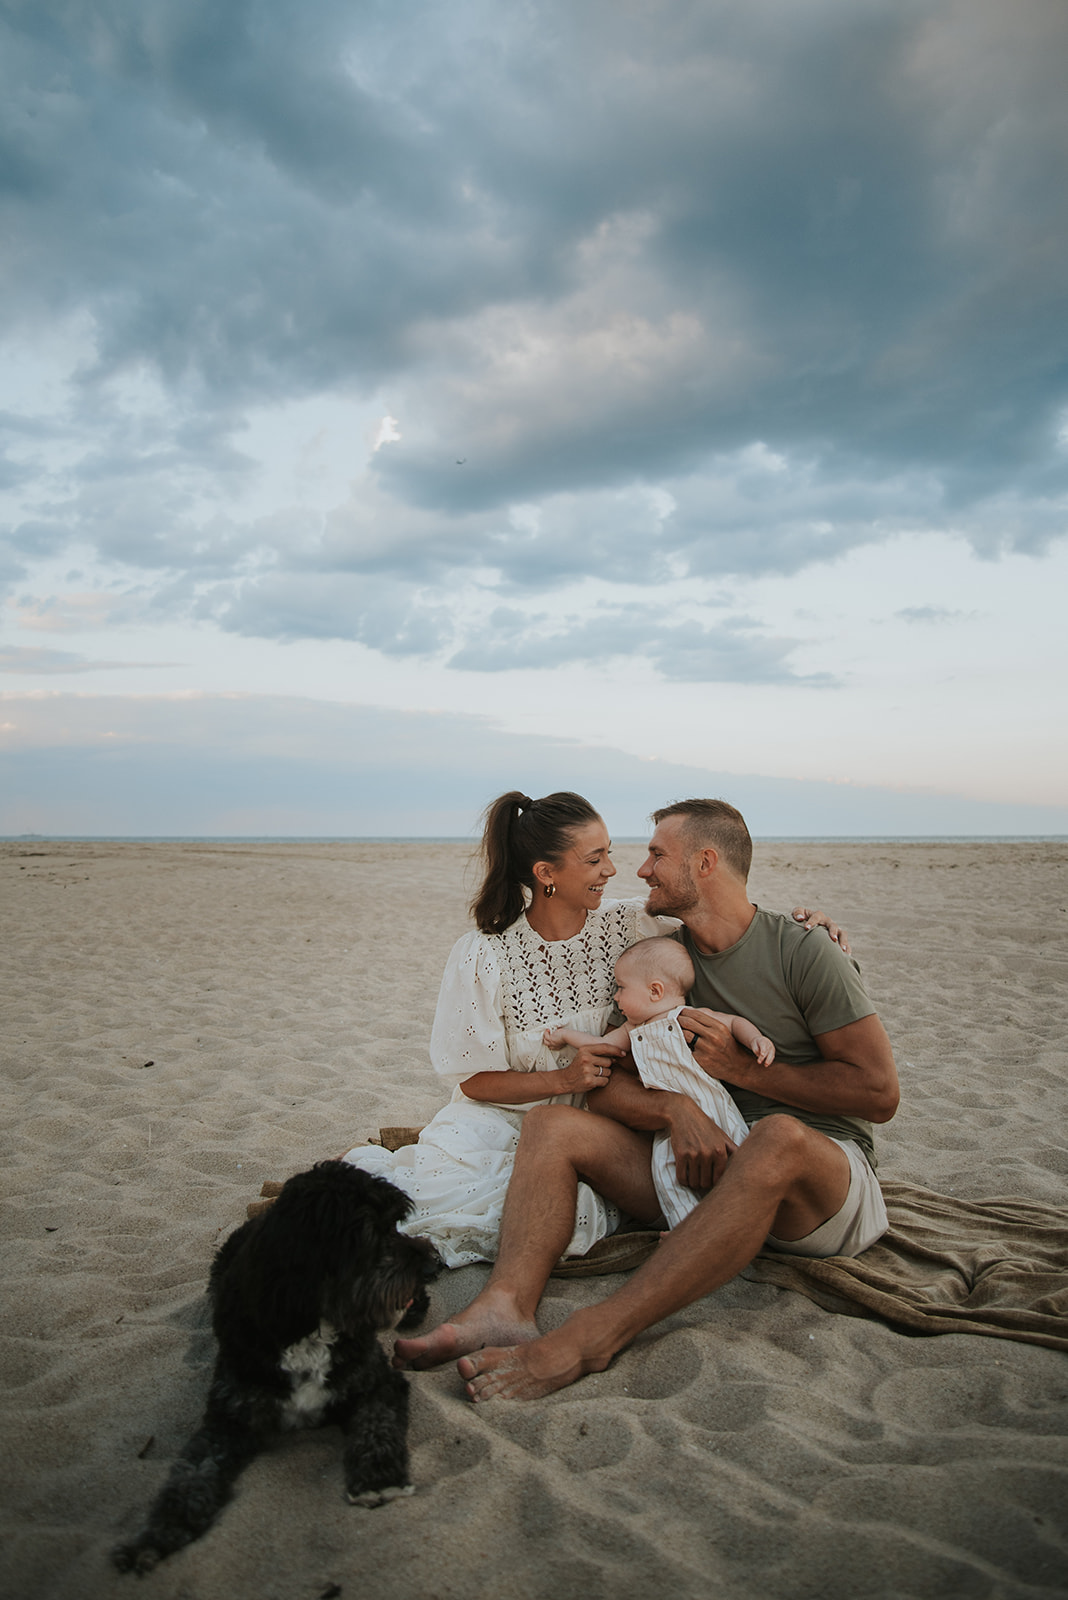 A family photoshoot at the beach with their 6 month old baby who is at the beach for the first time at sunset